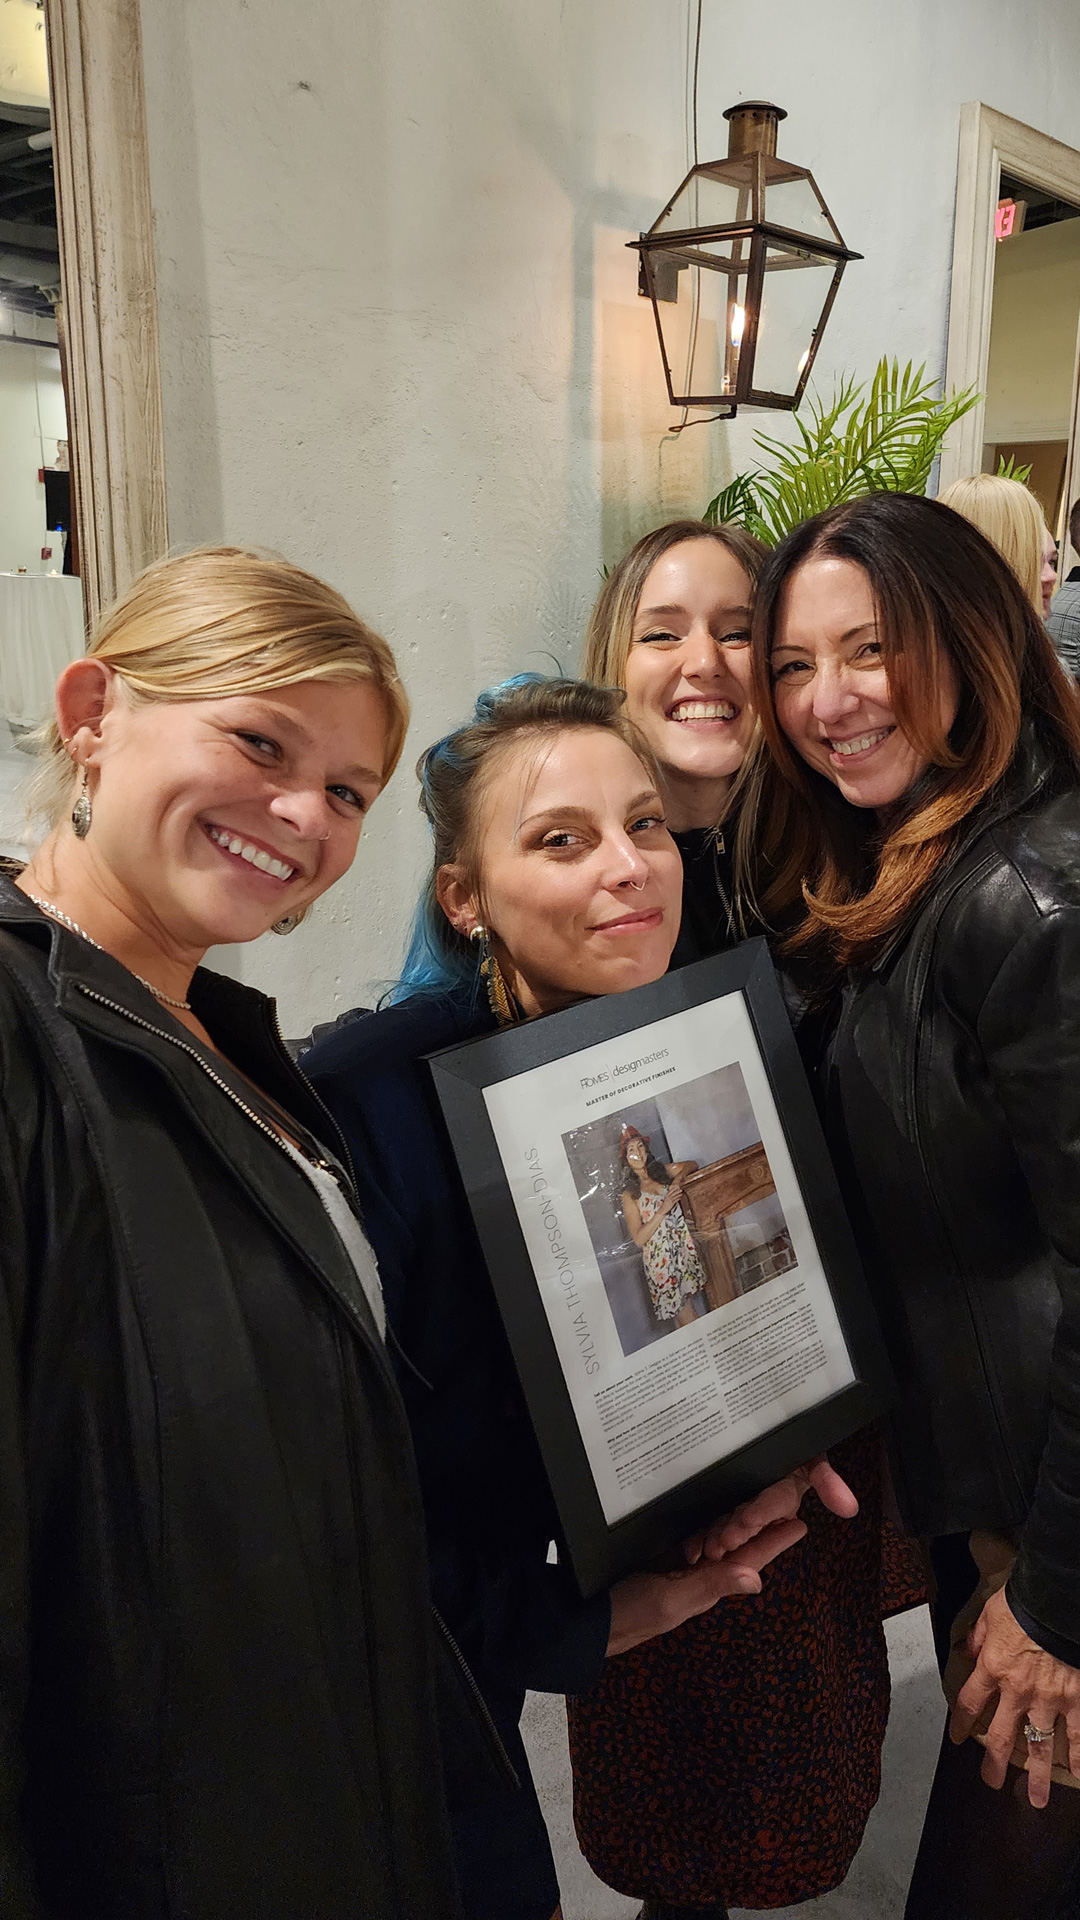 Having a great time at the New Orleans Homes Magazine “2022 Design Masters Award Ceremony!” From left Tess Riehlmann – Artisan Apprentice, Jess Pottker – Artisan, Tyler Wyche – Sylvia’s eldest daughter, and Sylvia Thompson-Dias, Master Artisan and Owner.